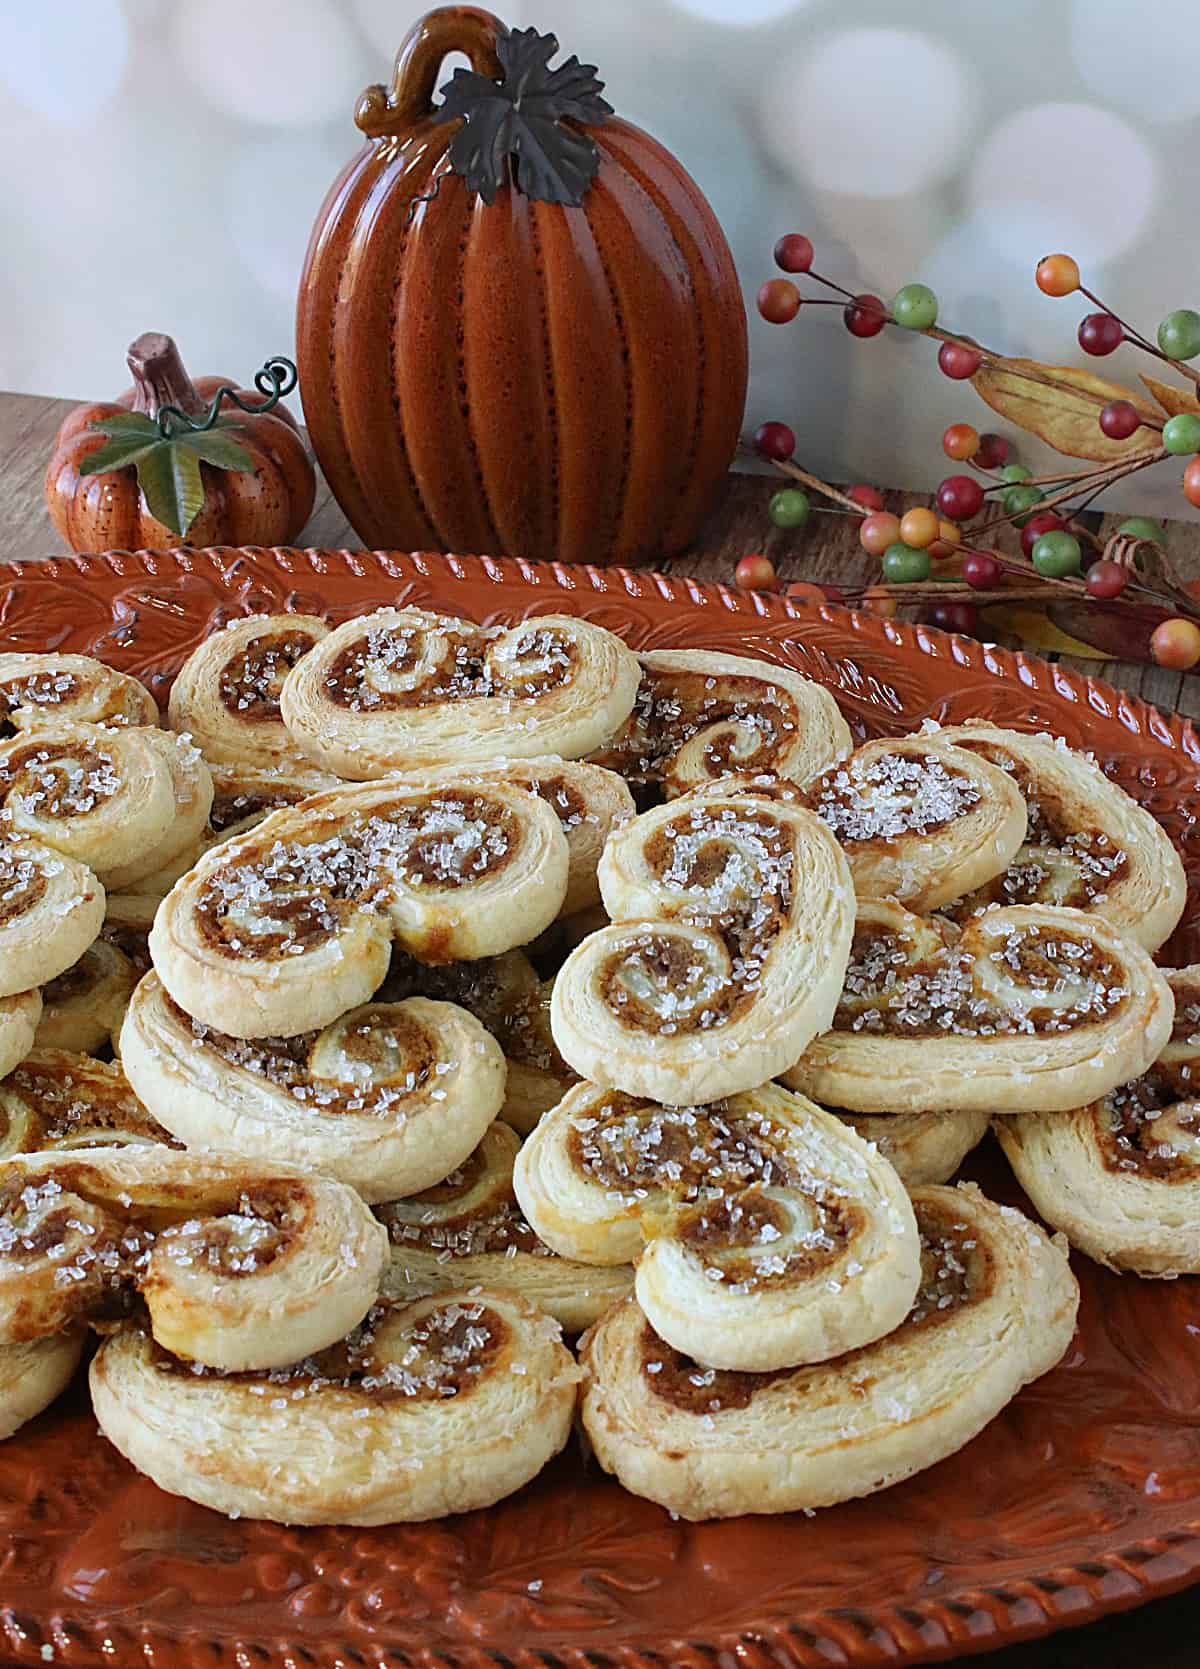 An orange plate filled with Pumpkin Spice Palmiers topped with sanding sugar.